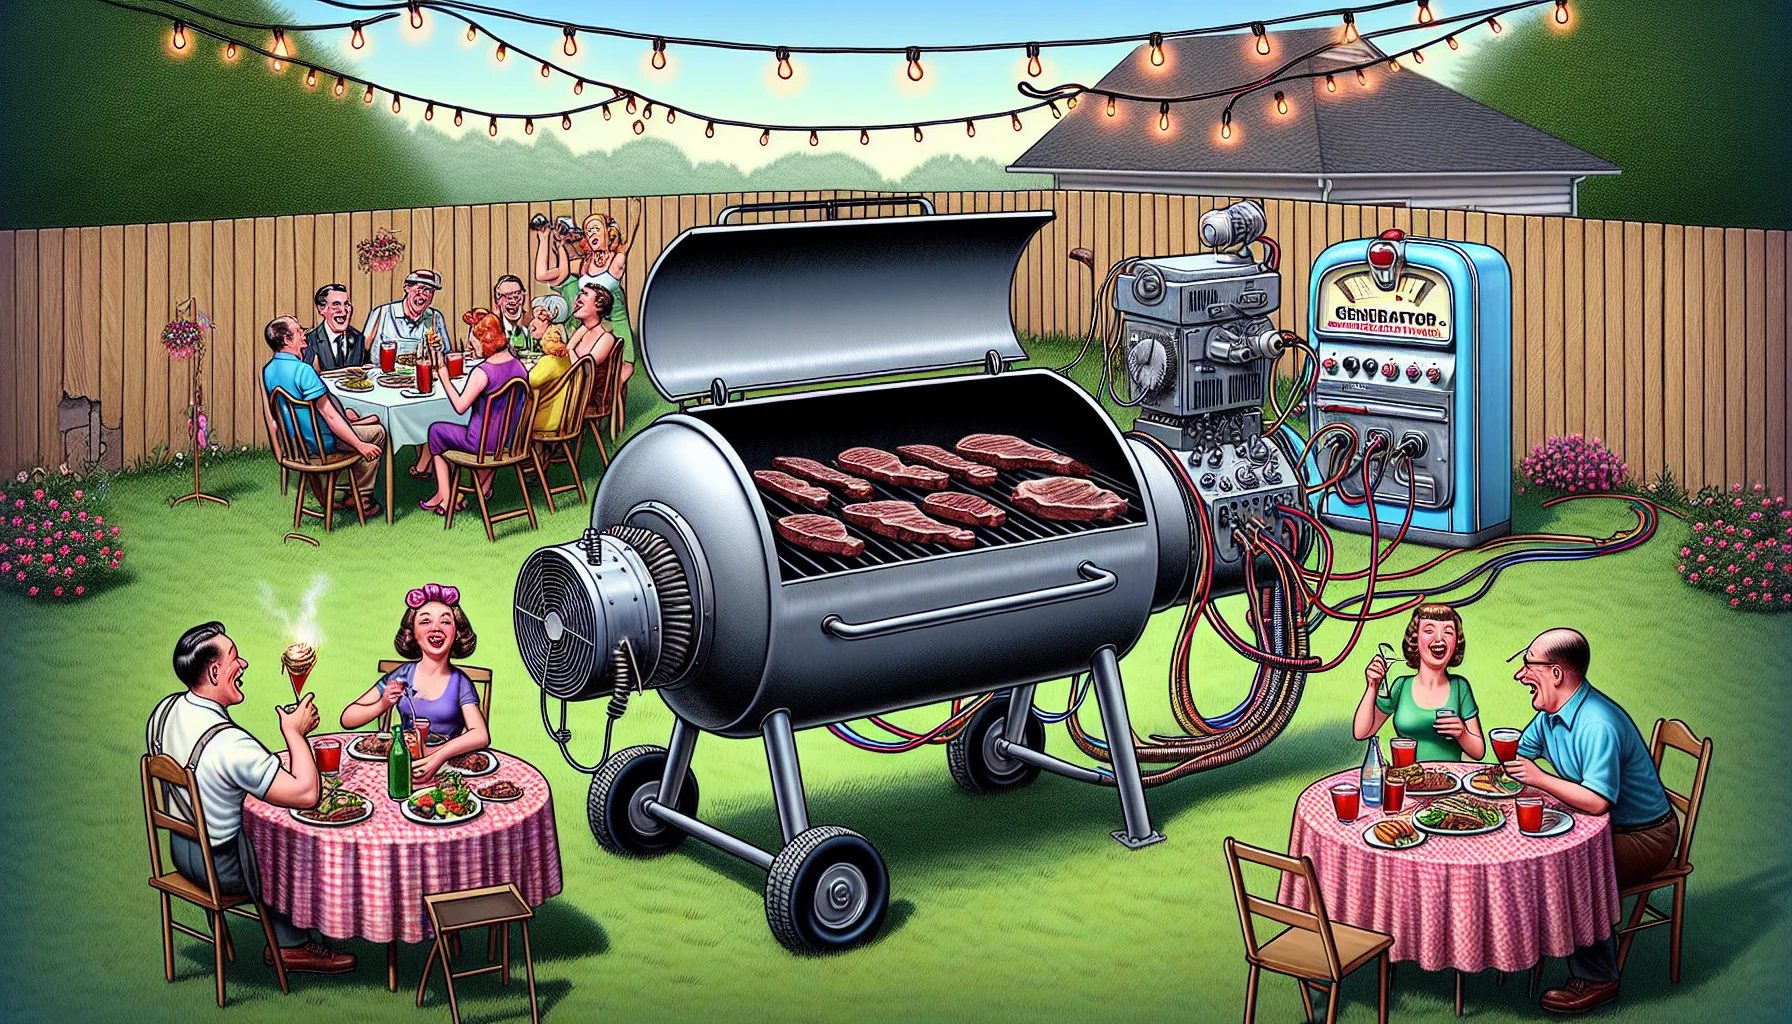 A funny and enticing scenario showcasing a fictitious power generator filter. Picture this, there's a backyard barbecue party underway. To the left, there's an oversized charcoal grill filled with sizzling steaks. The grill is humorously hooked up to a large, complex-looking power generator filter. The filter transforms the grill's smoke into an electrical energy source, powering twinkling fairy lights strung around the yard and lively music being played from a retro jukebox. To the right, party guests of diverse gender and descent are shown marvelling at this innovative setup, laughing, and snapping photos. The scene conveys humor, innovation, and the spirit of practical creativity.